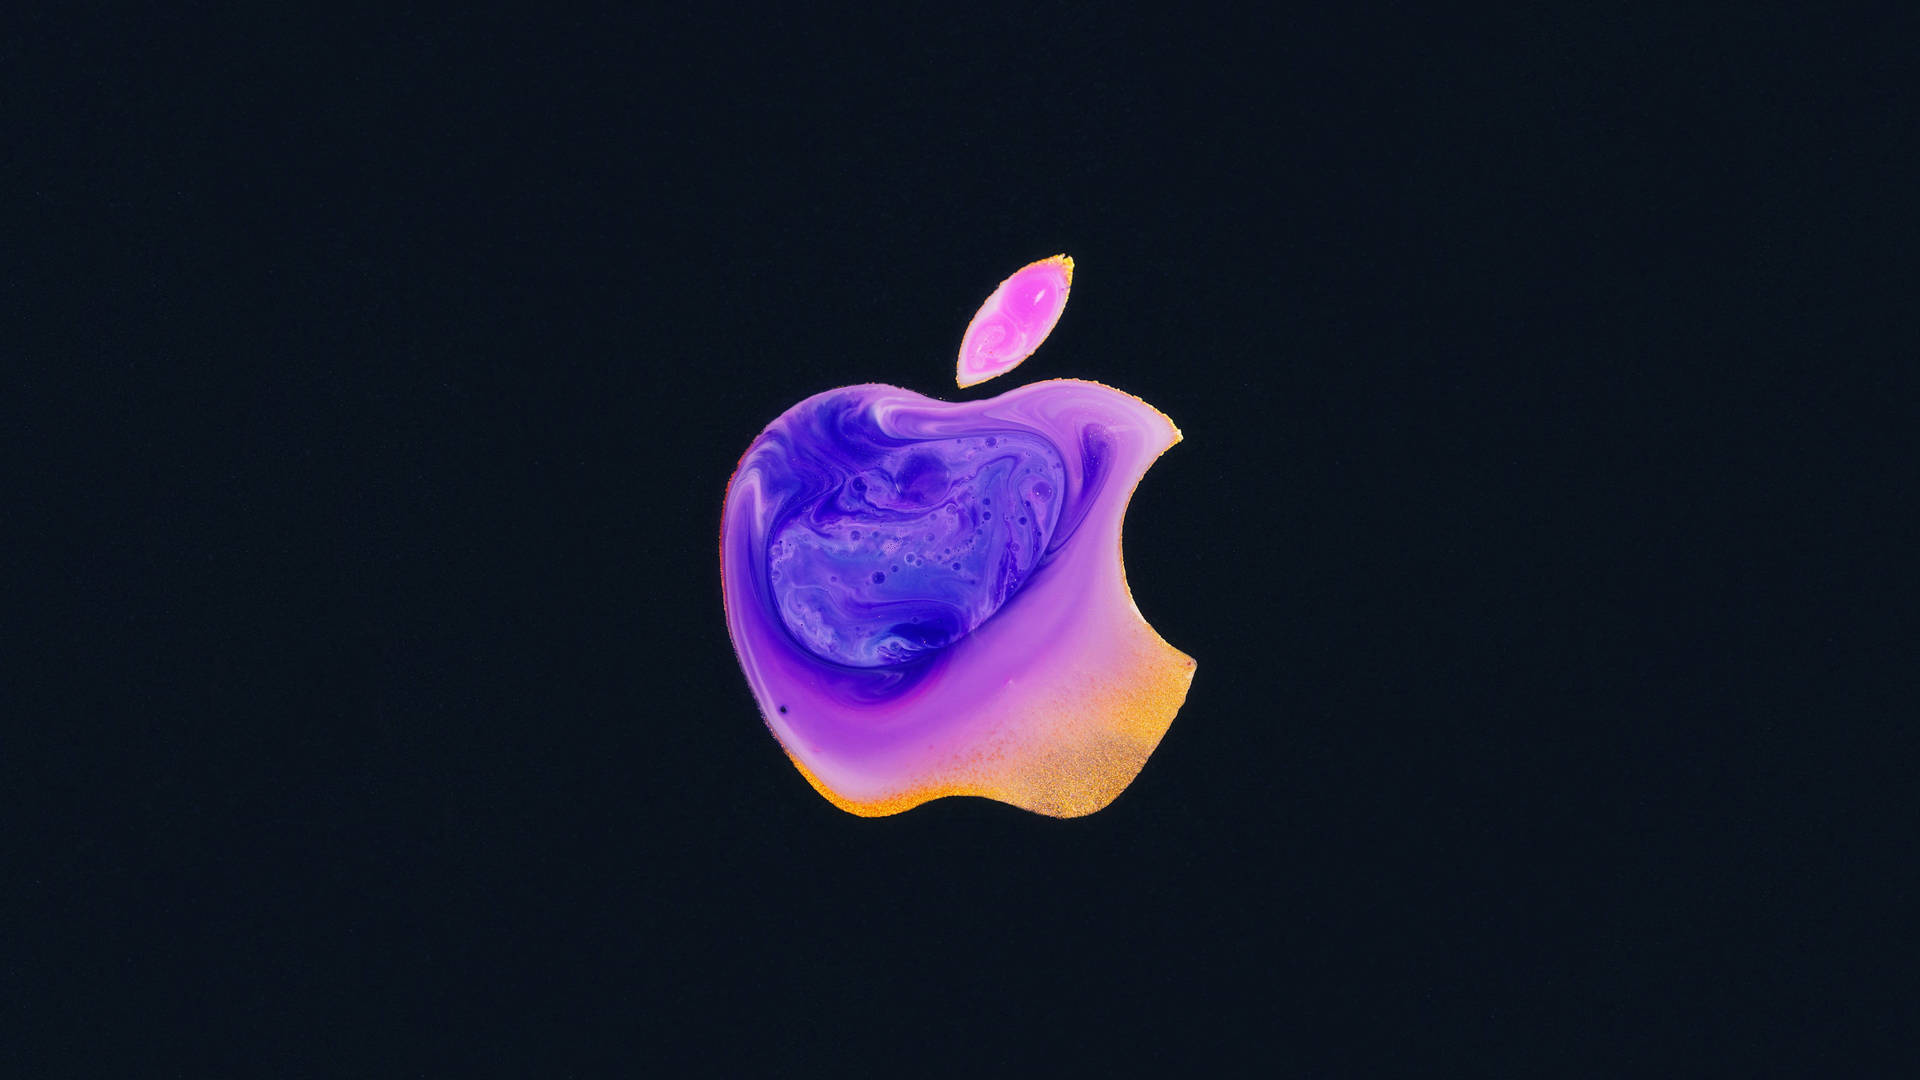 Full Hd Apple With Marble Design Picture